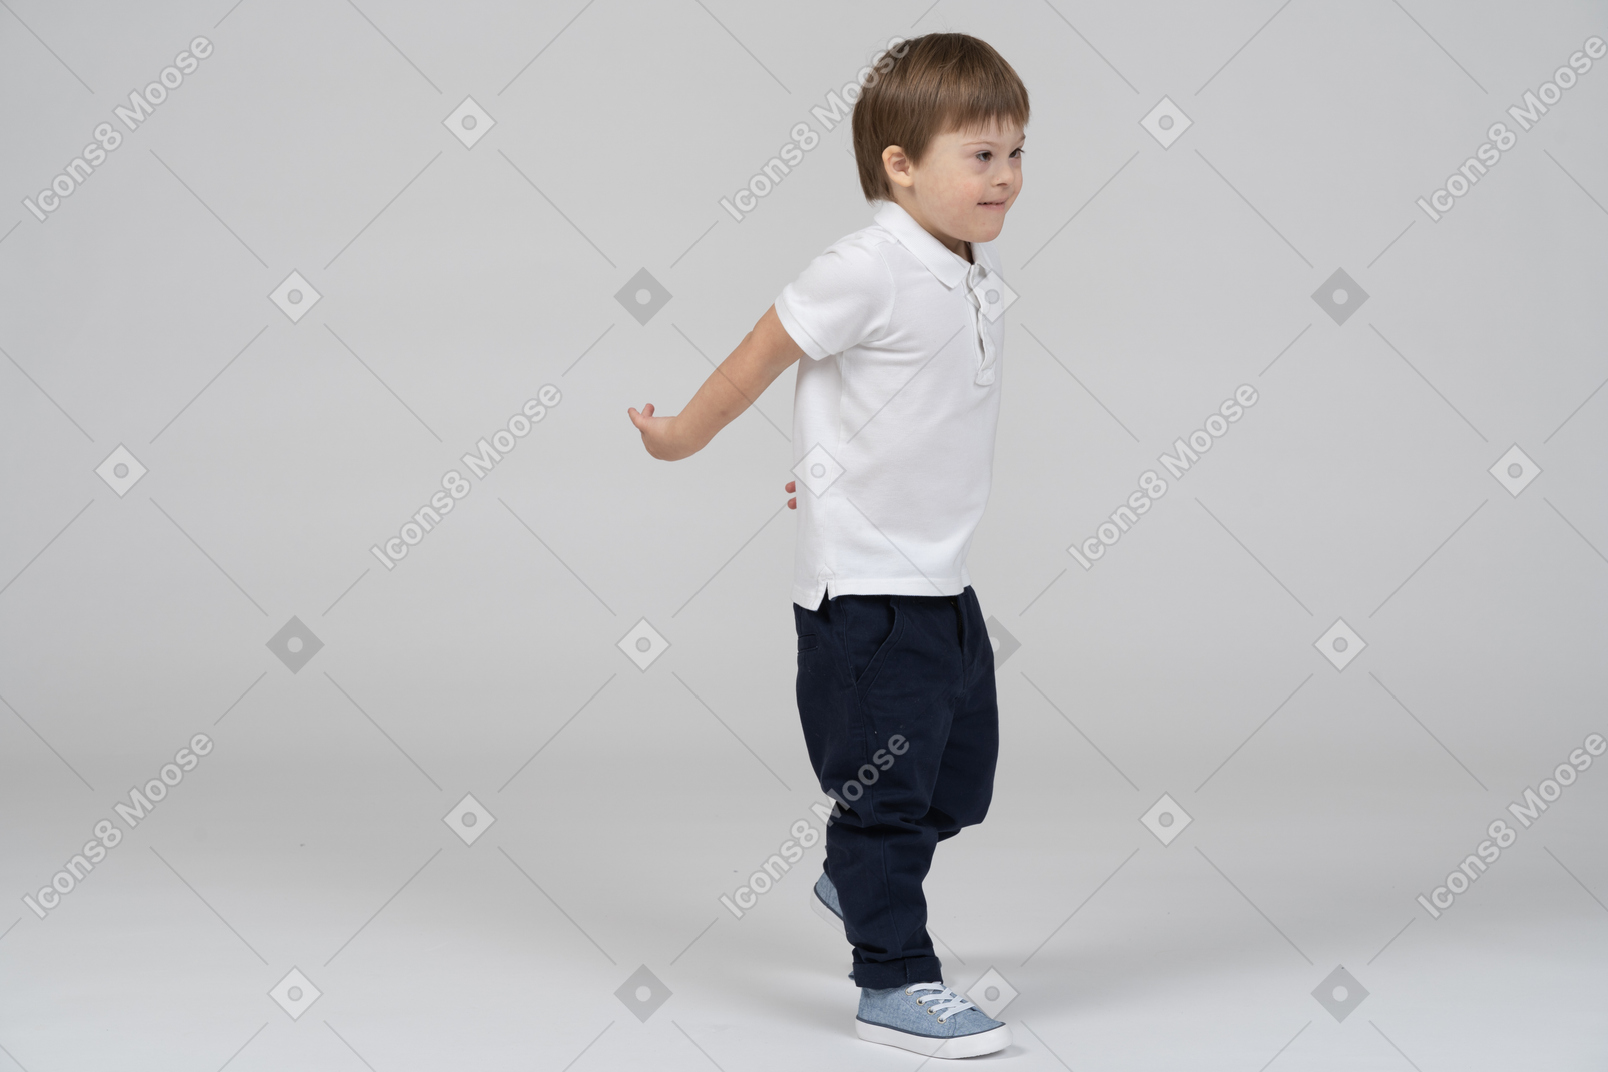 Three-quarter view of a boy stepping forward with hands behind his back